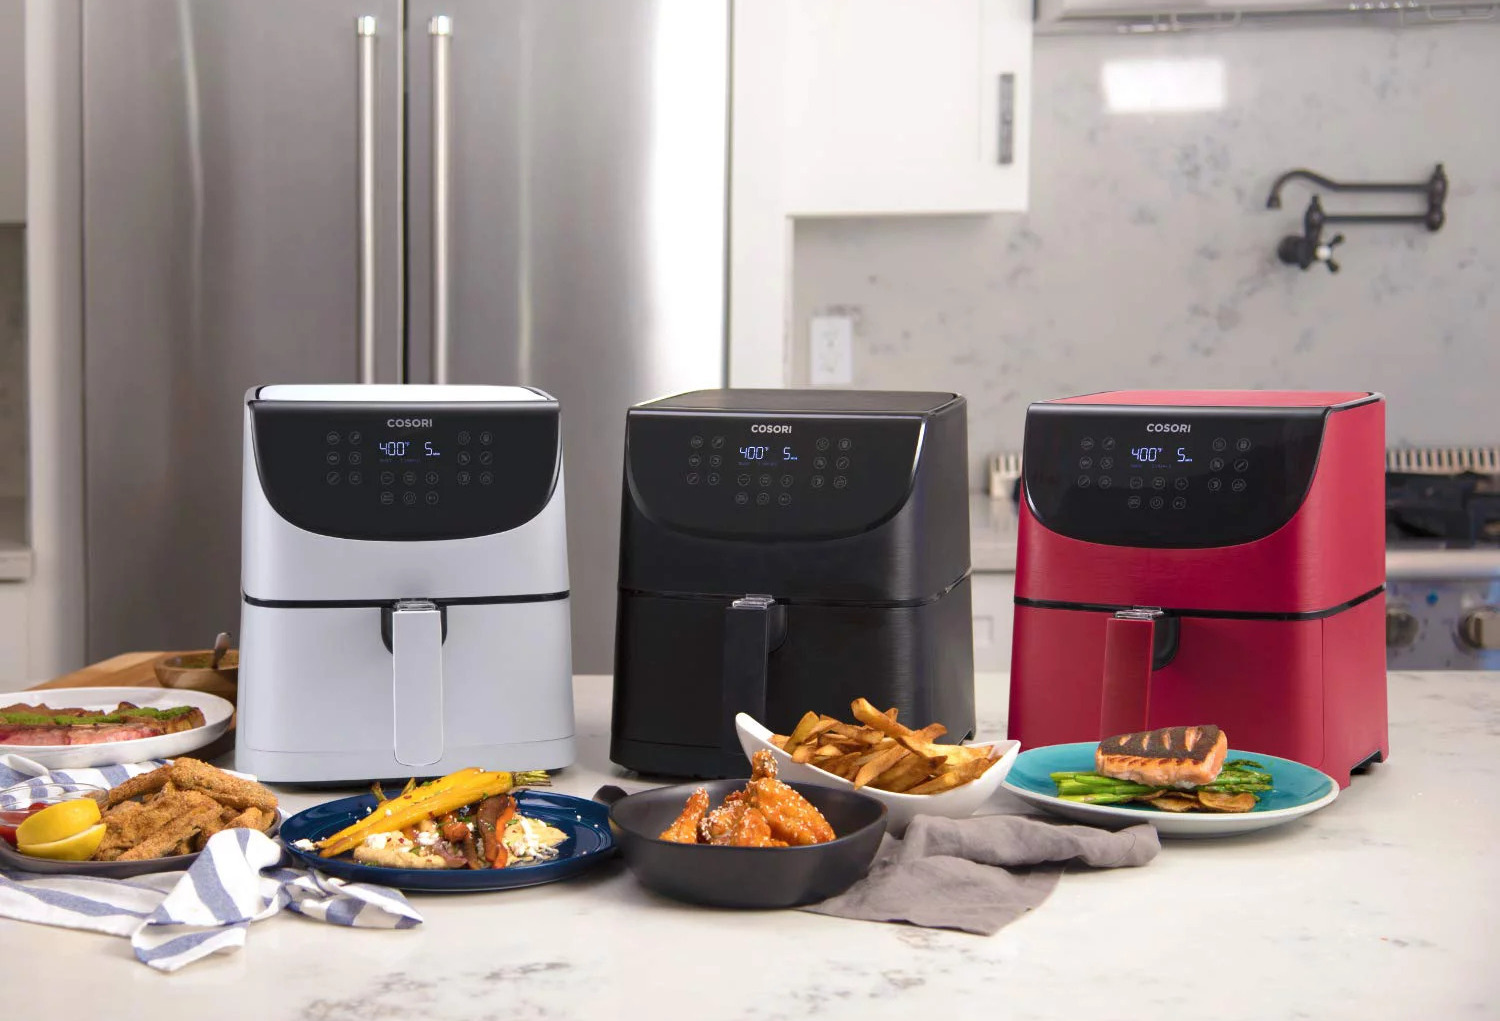 COSORI Pro Gen 2 Air Fryer 5 8QT, Upgraded Version with Stable